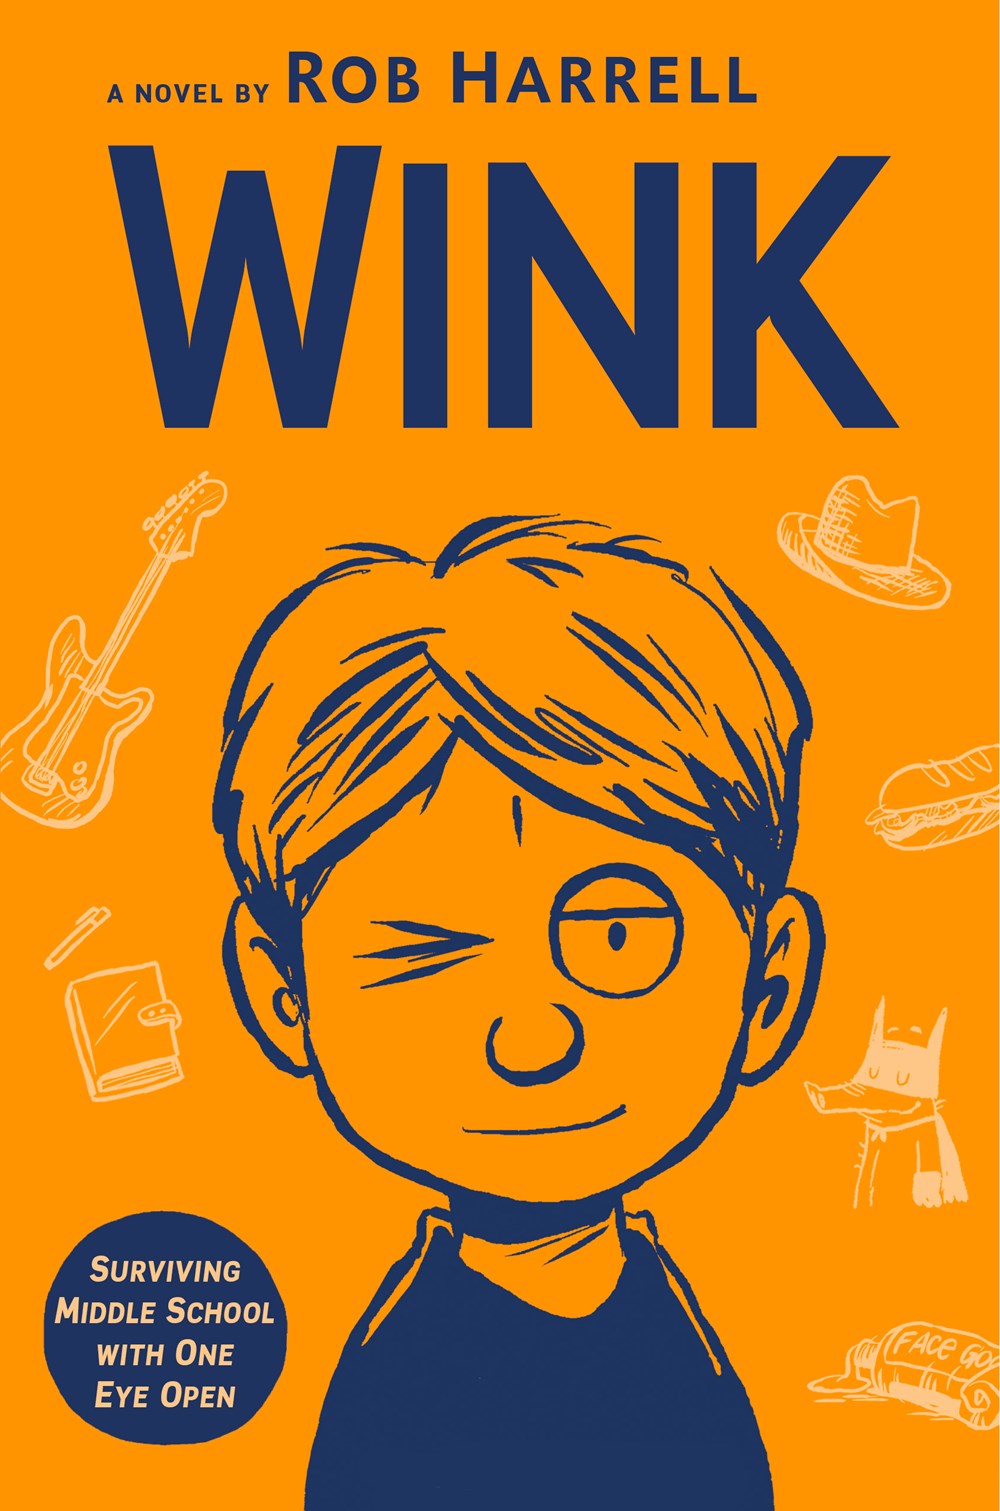 Wink book cover